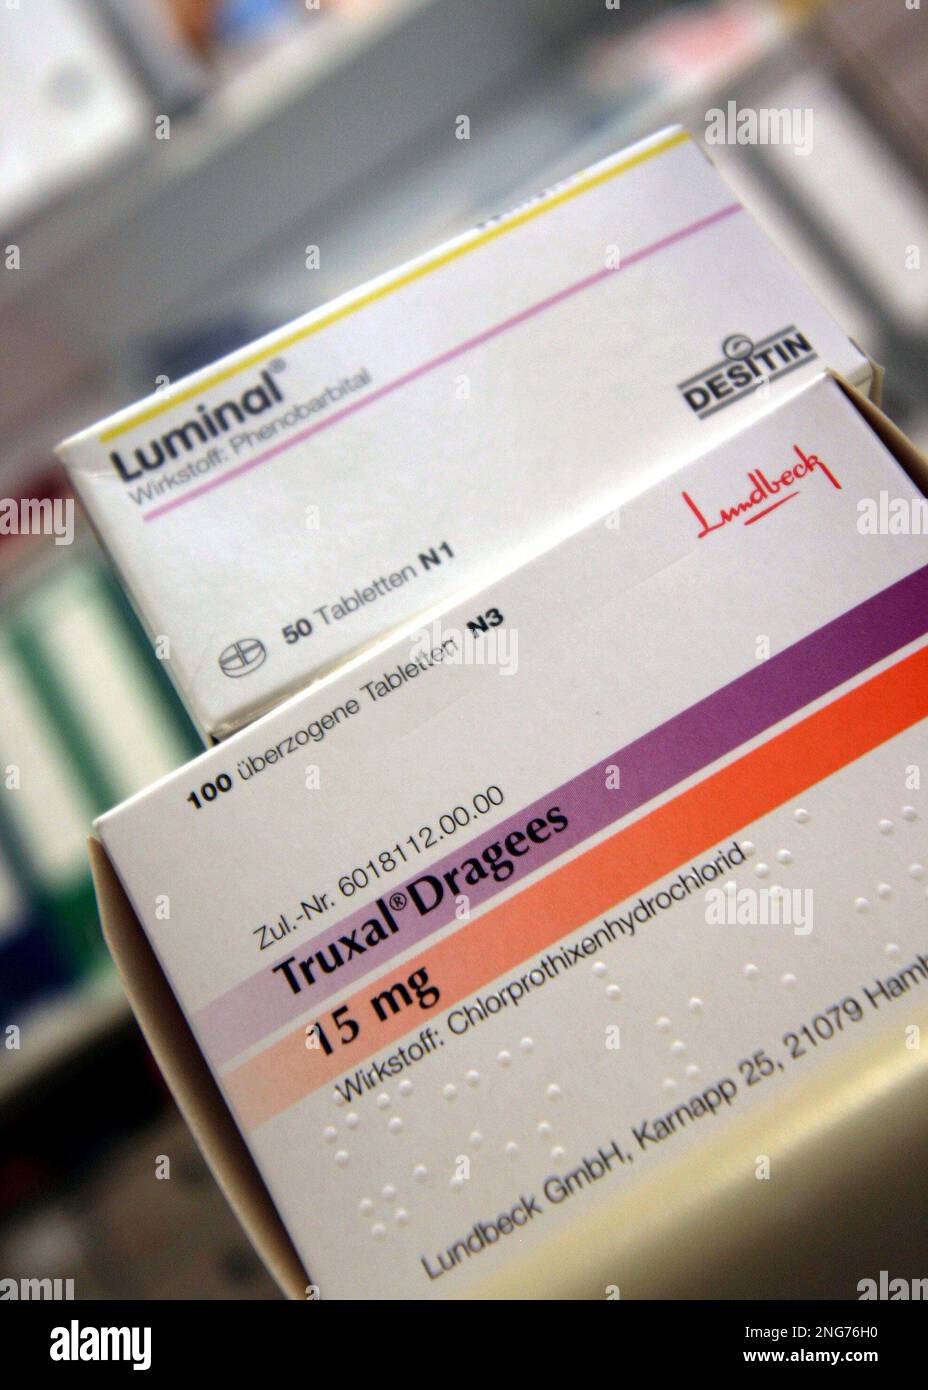 Die Medikamente "Truxal" und "Luminal", fotografiert in einer Apotheke in  Frankfurt am Main am Donnerstag, 14. Dezember 2006. (AP Photo/Bastian  Foest) ------- Packs of the pharmaceuticals "Truxal" and "Luminal" are  pictured at